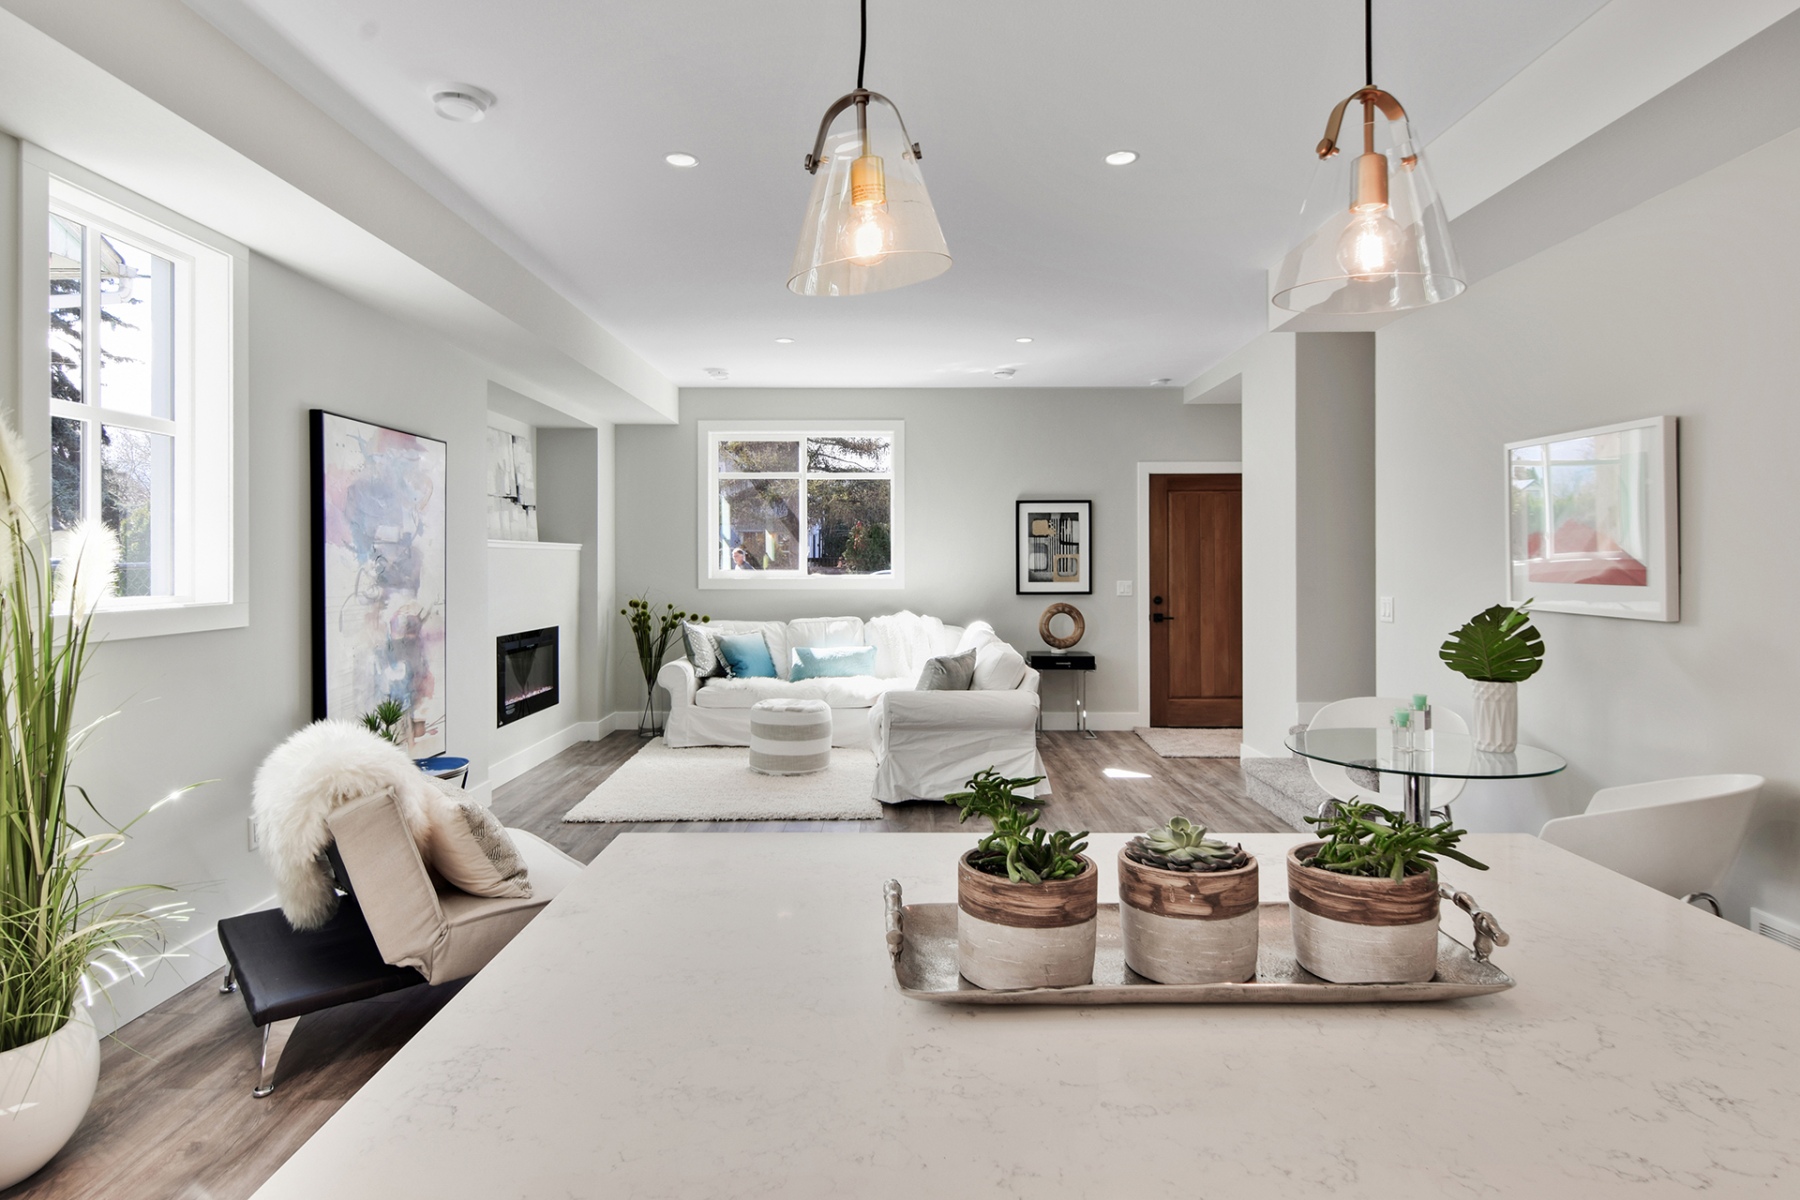 1_harmony_homes_glenwood_infill_project_interior_design_gallery_image_8